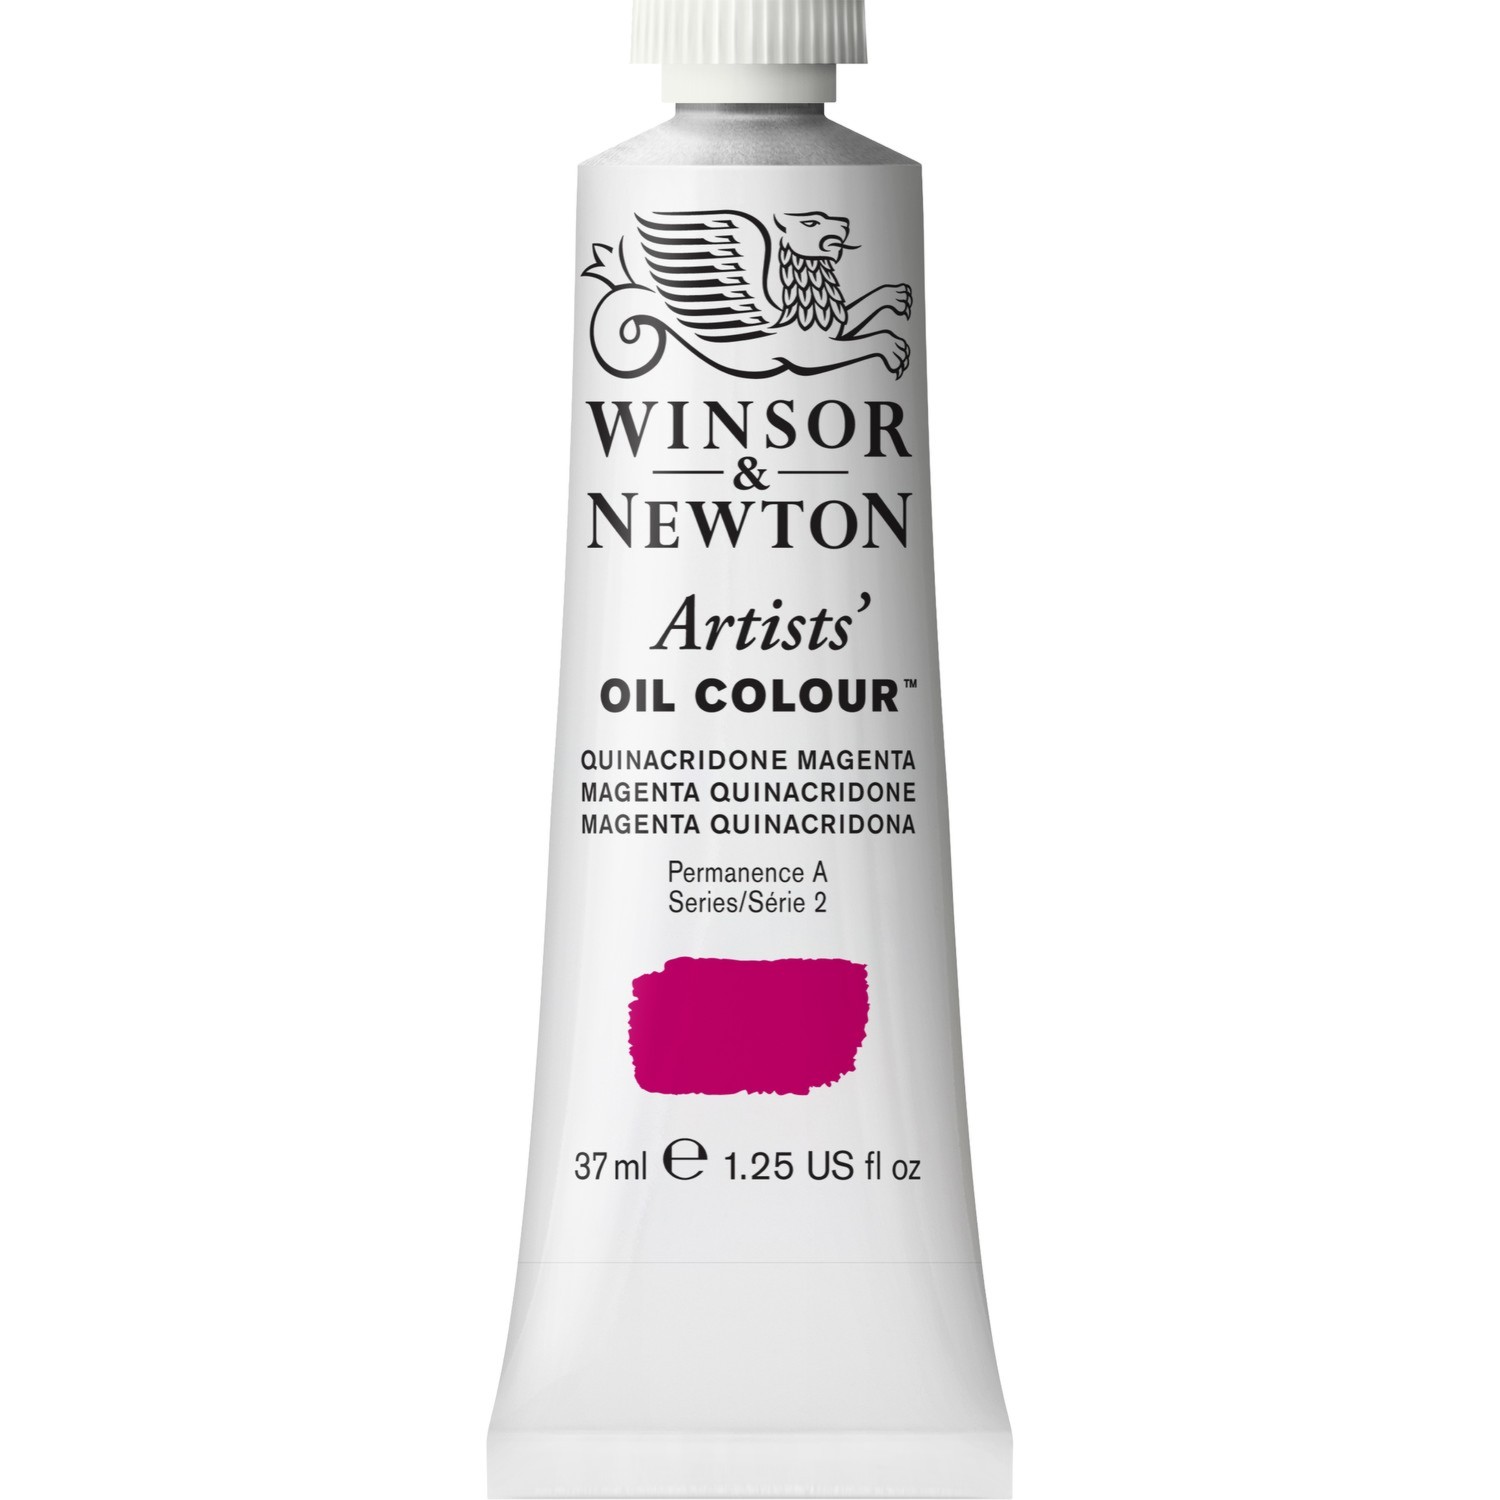 Winsor and Newton 37ml Artists' Oil Colours - Quinacridone Image 1